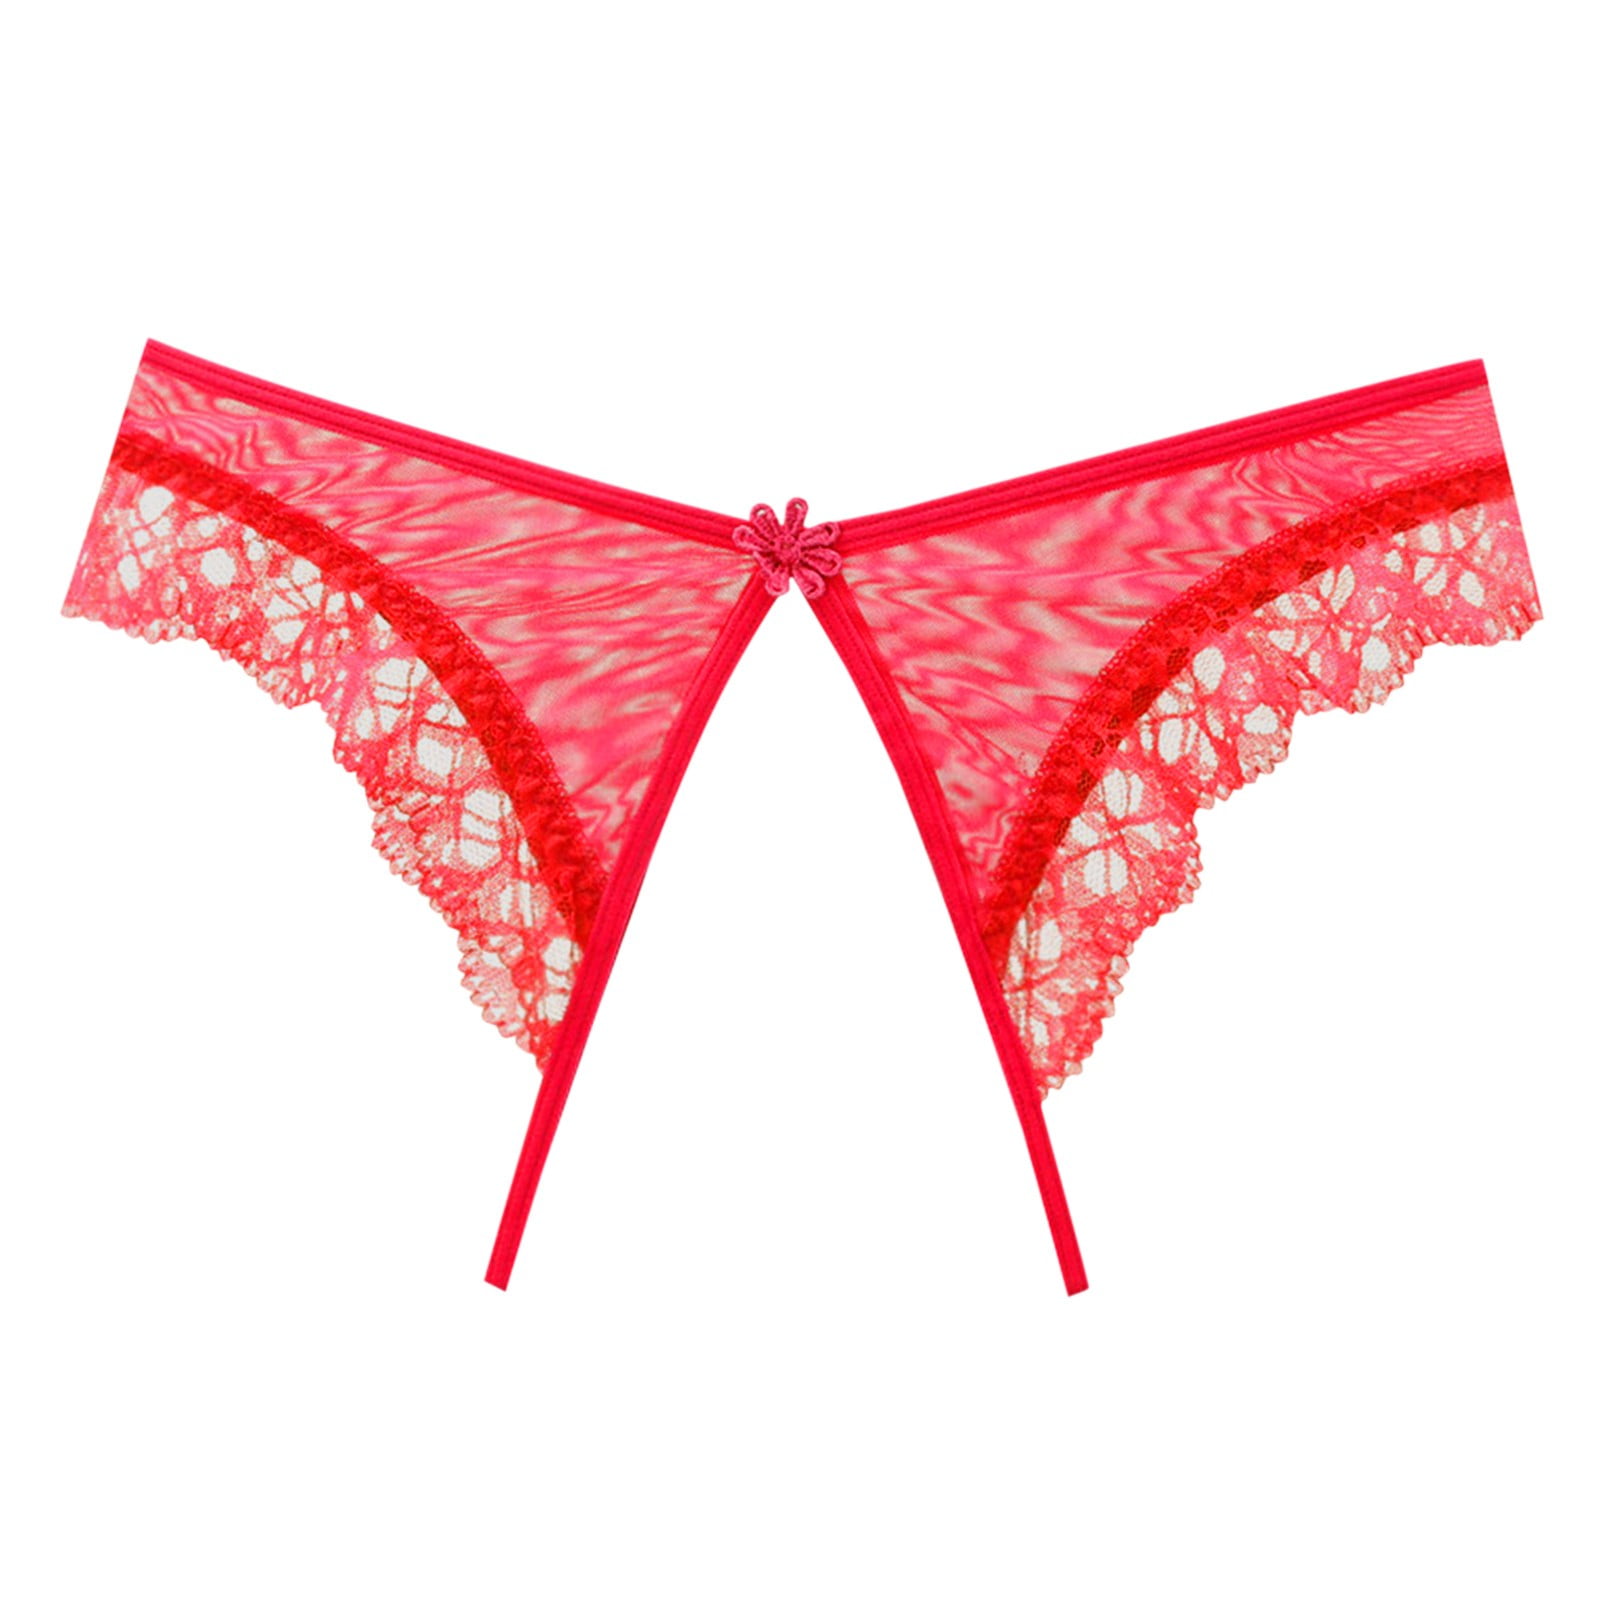  Panties - Intimates: Clothing, Shoes & Accessories